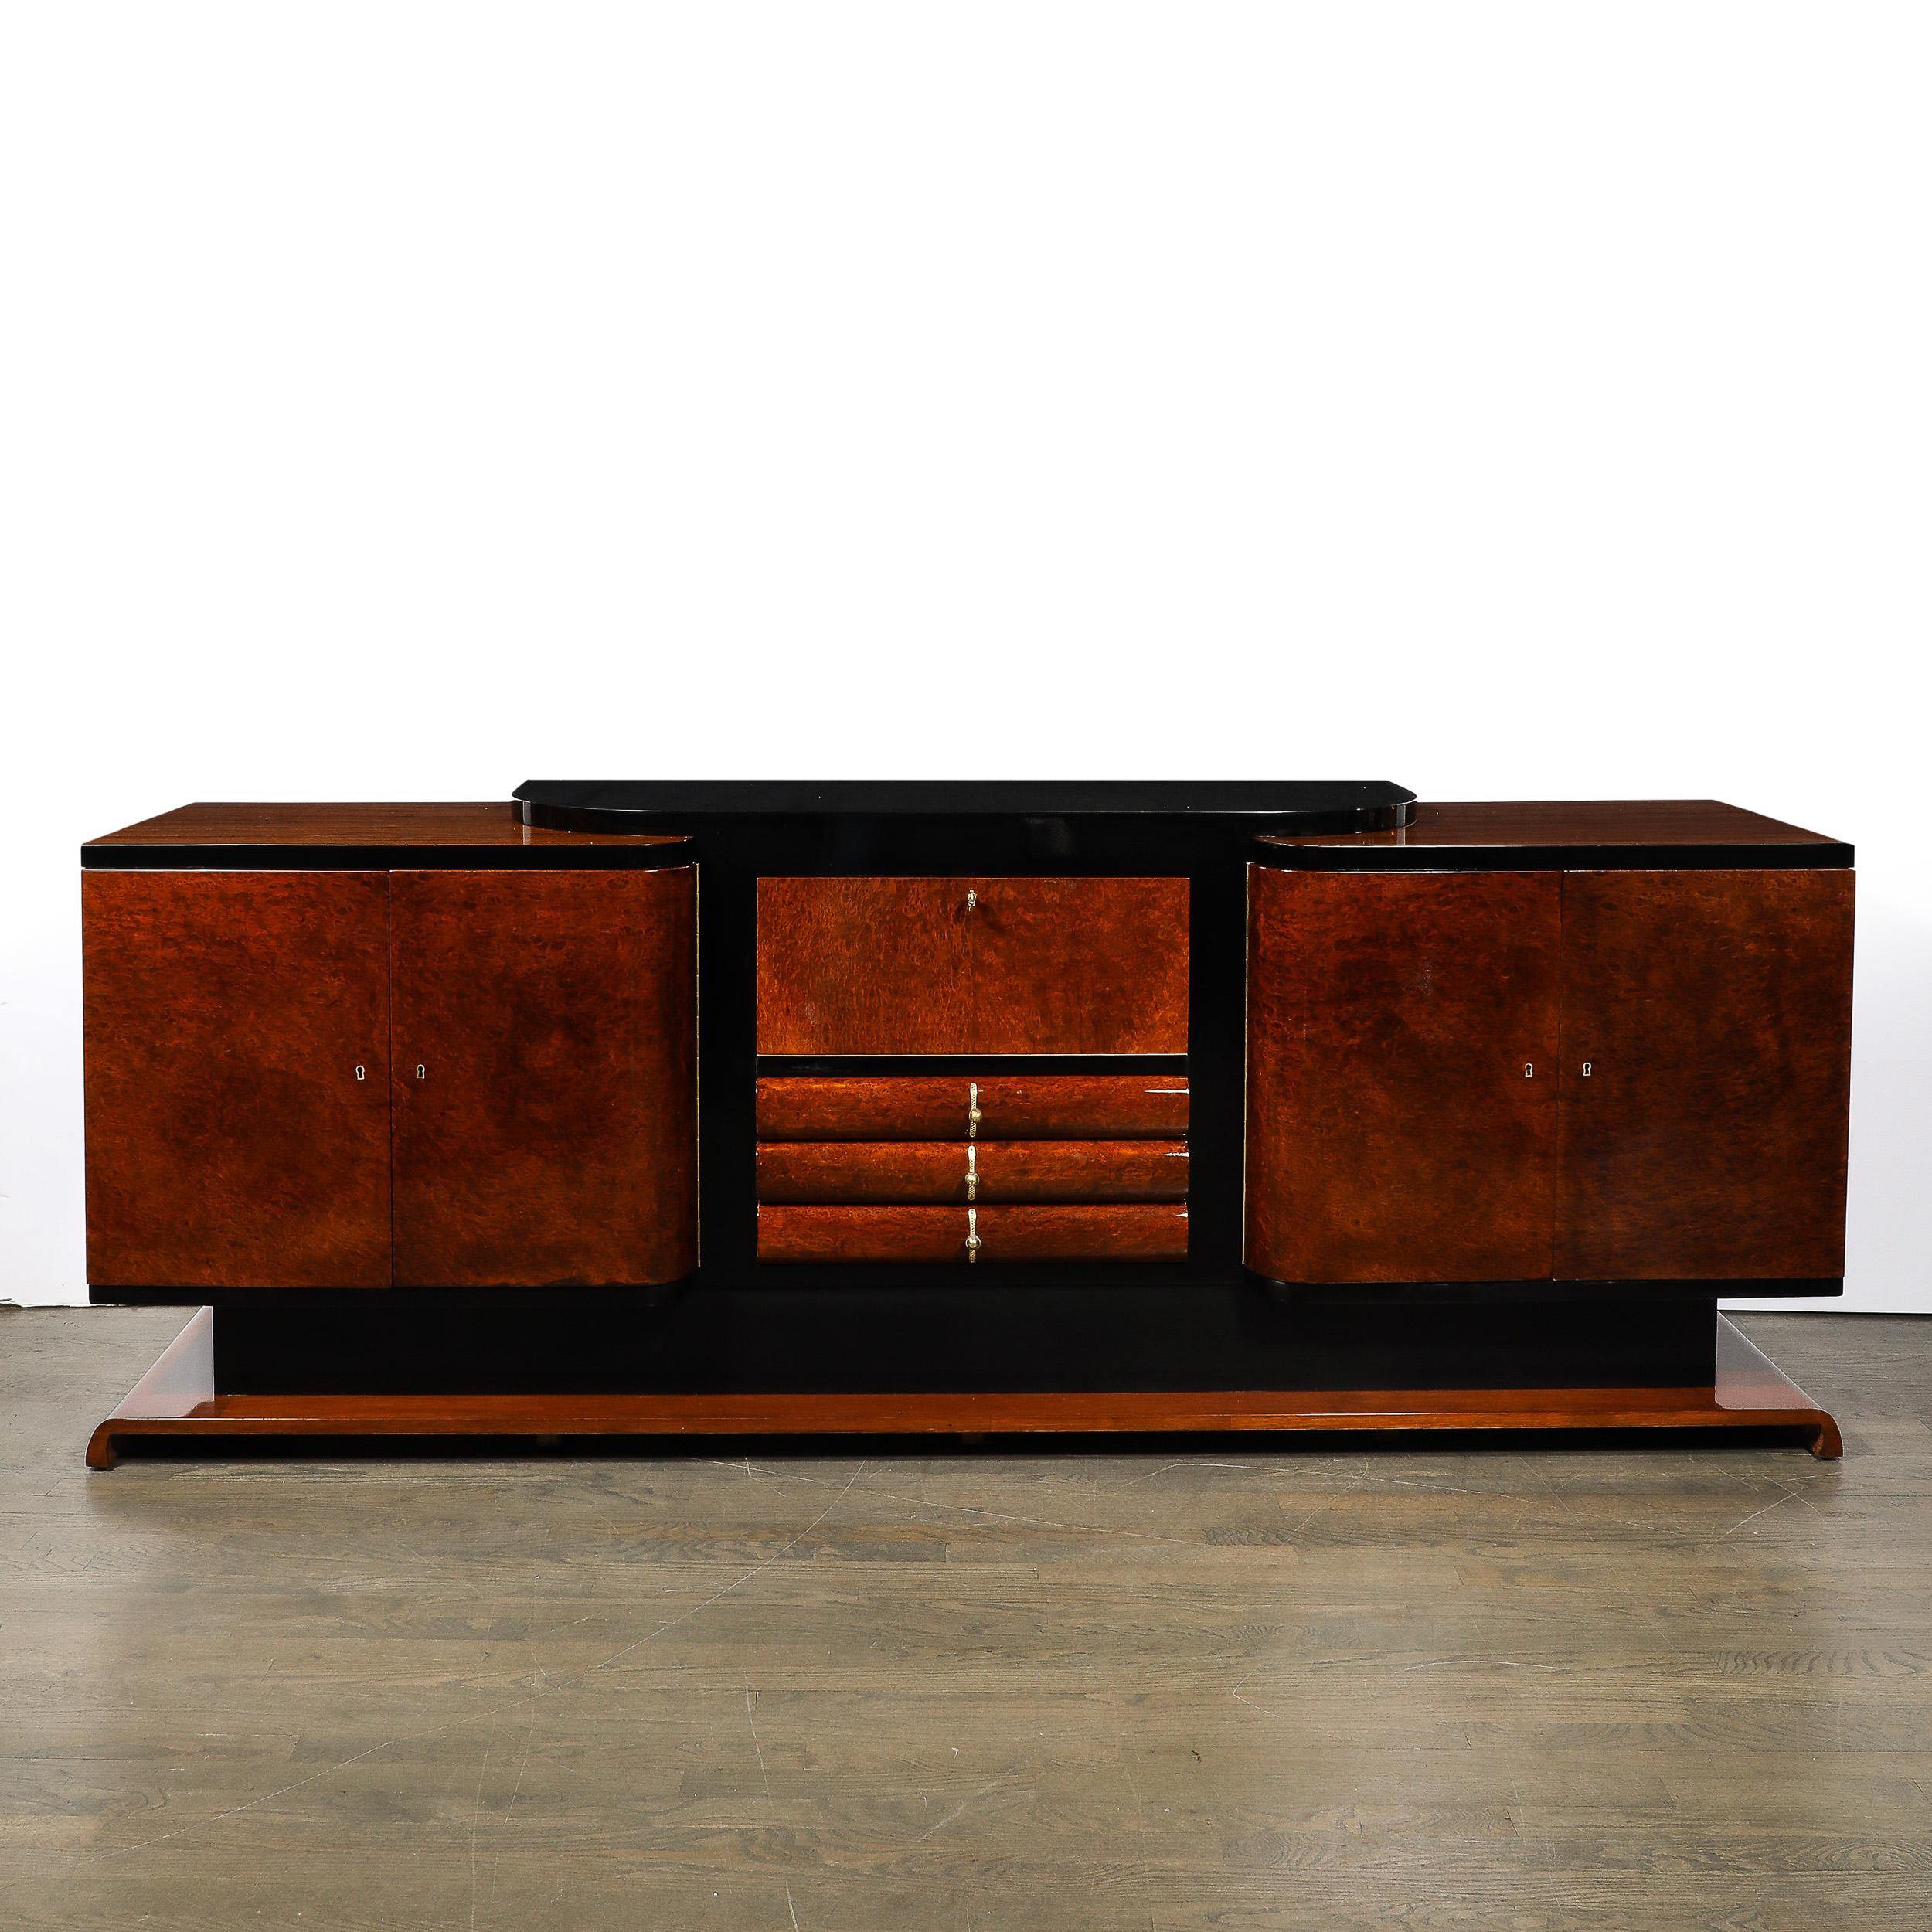 Brass Art Deco Sideboard in Bookmatched & Burled Amboyna Wood, Mahogany & Walnut Base For Sale